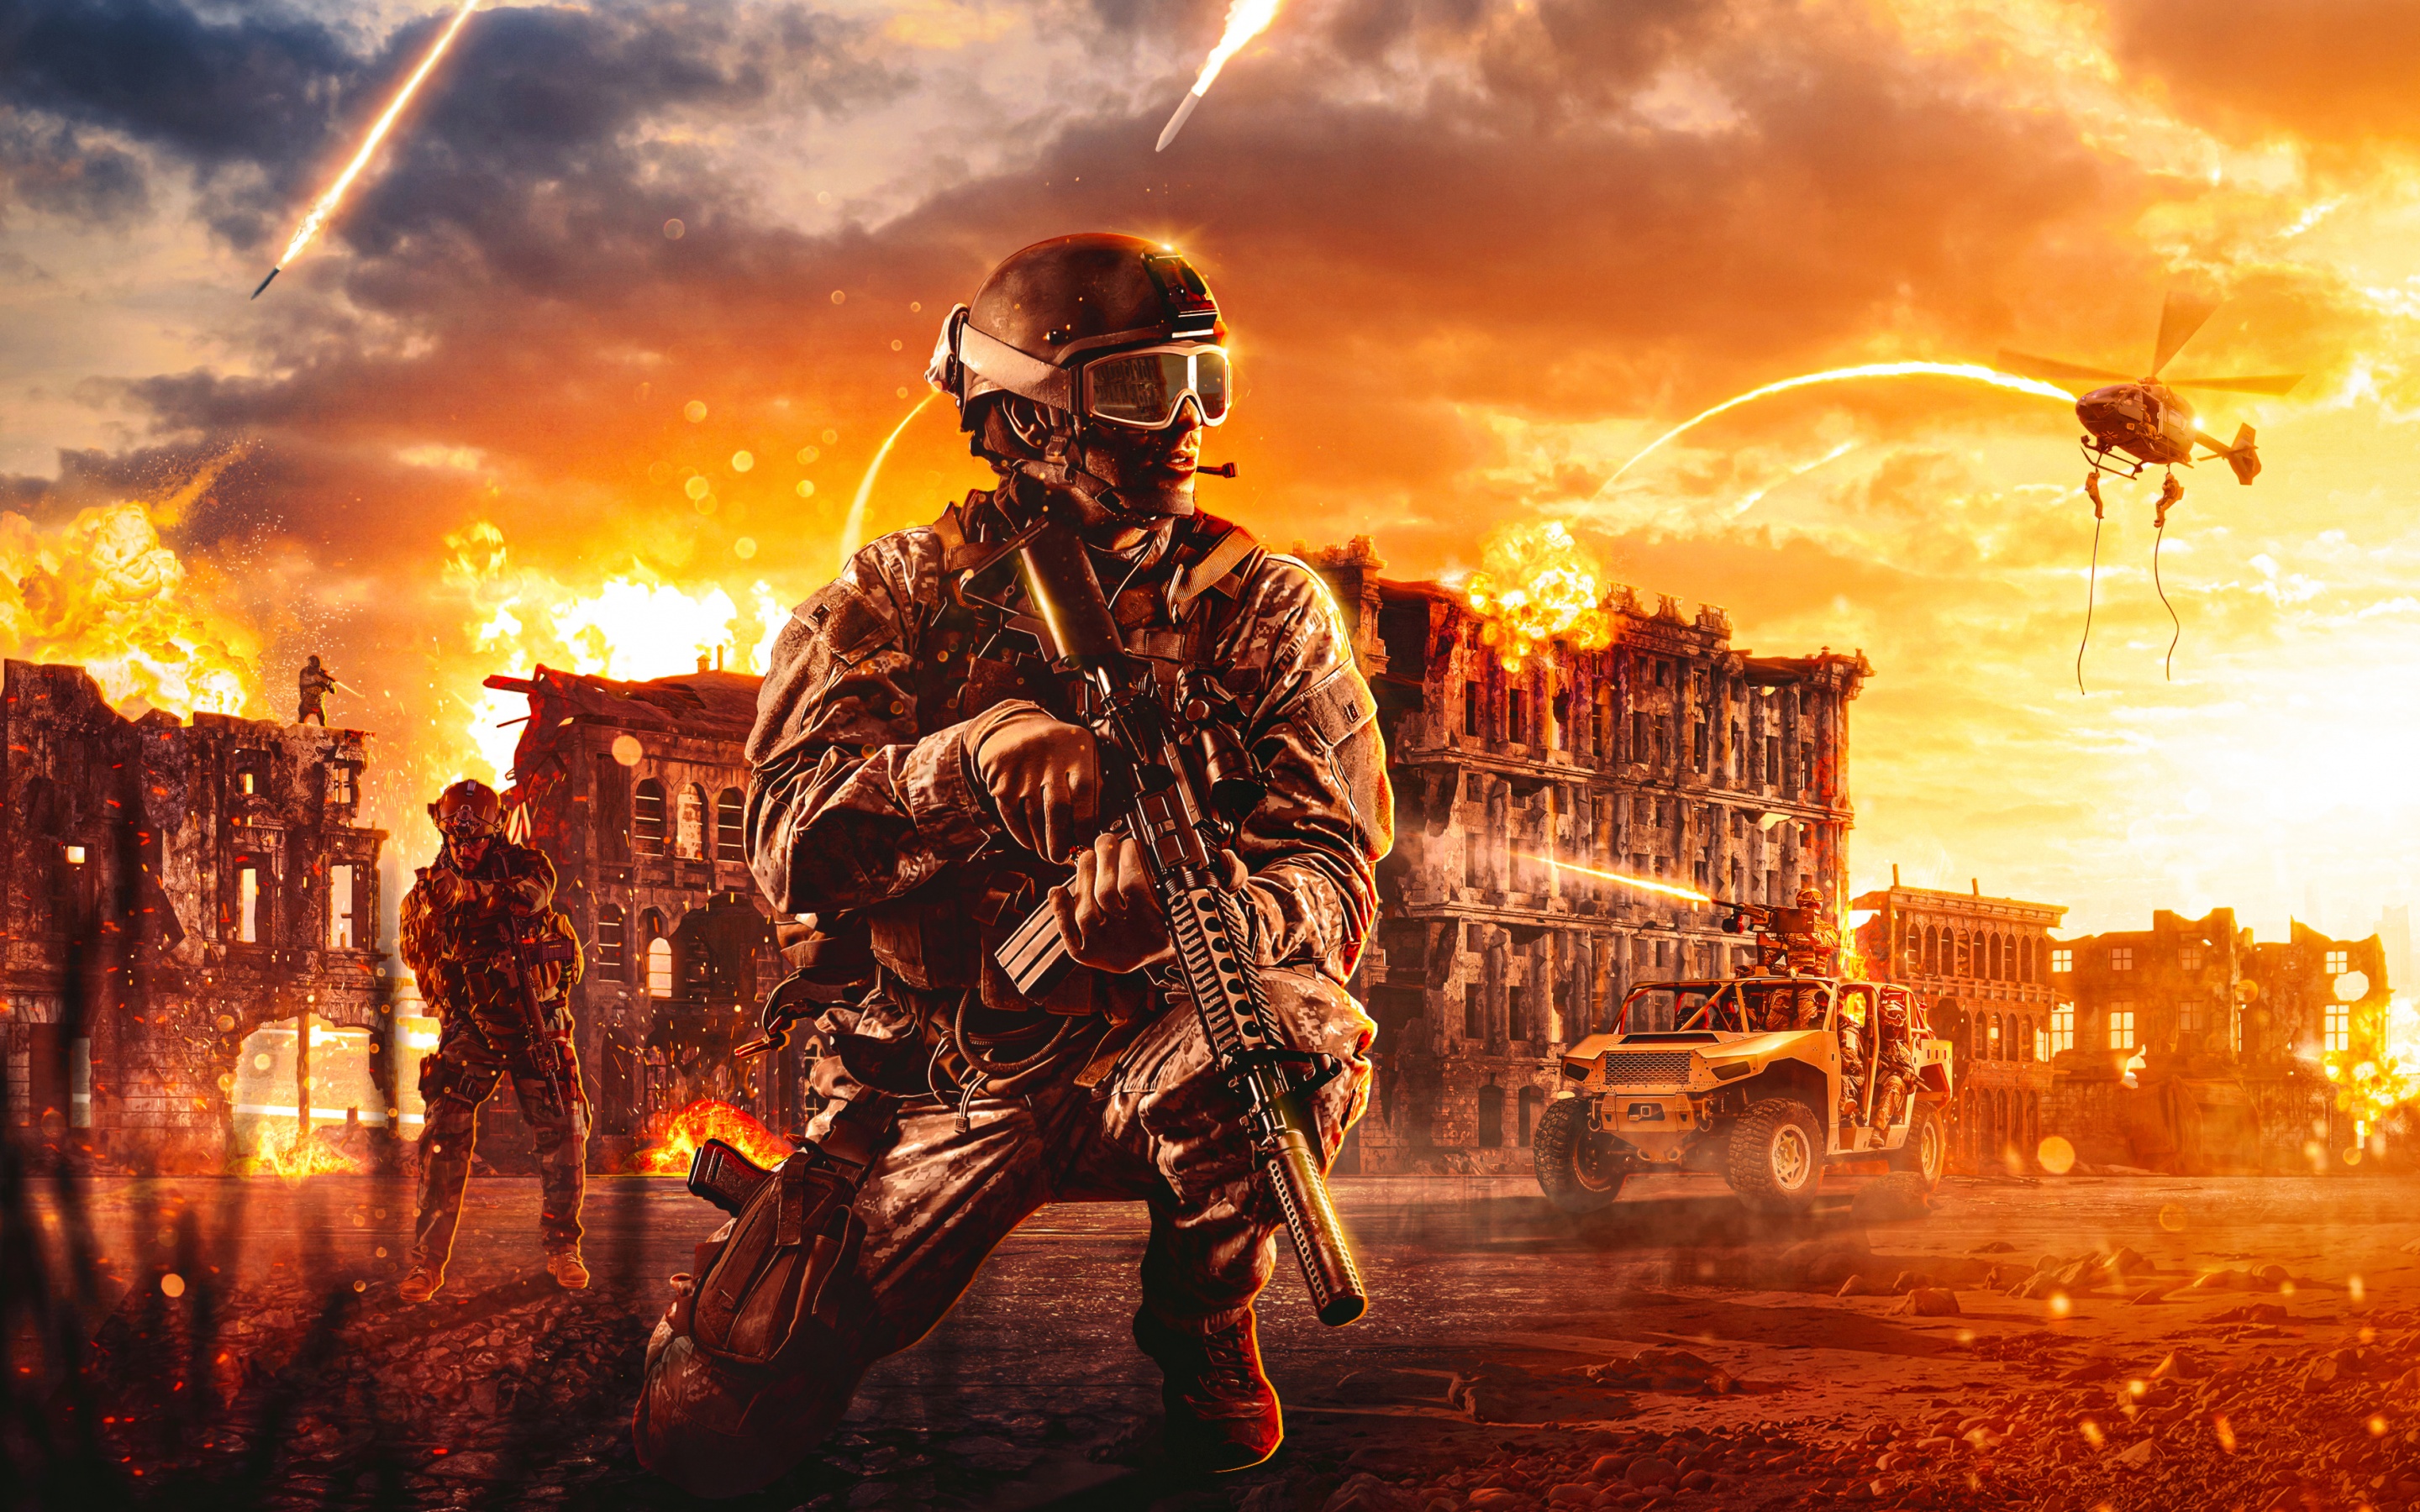 Call of Duty: Warzone 4K Wallpaper, Soldier, PlayStation 4, Xbox One